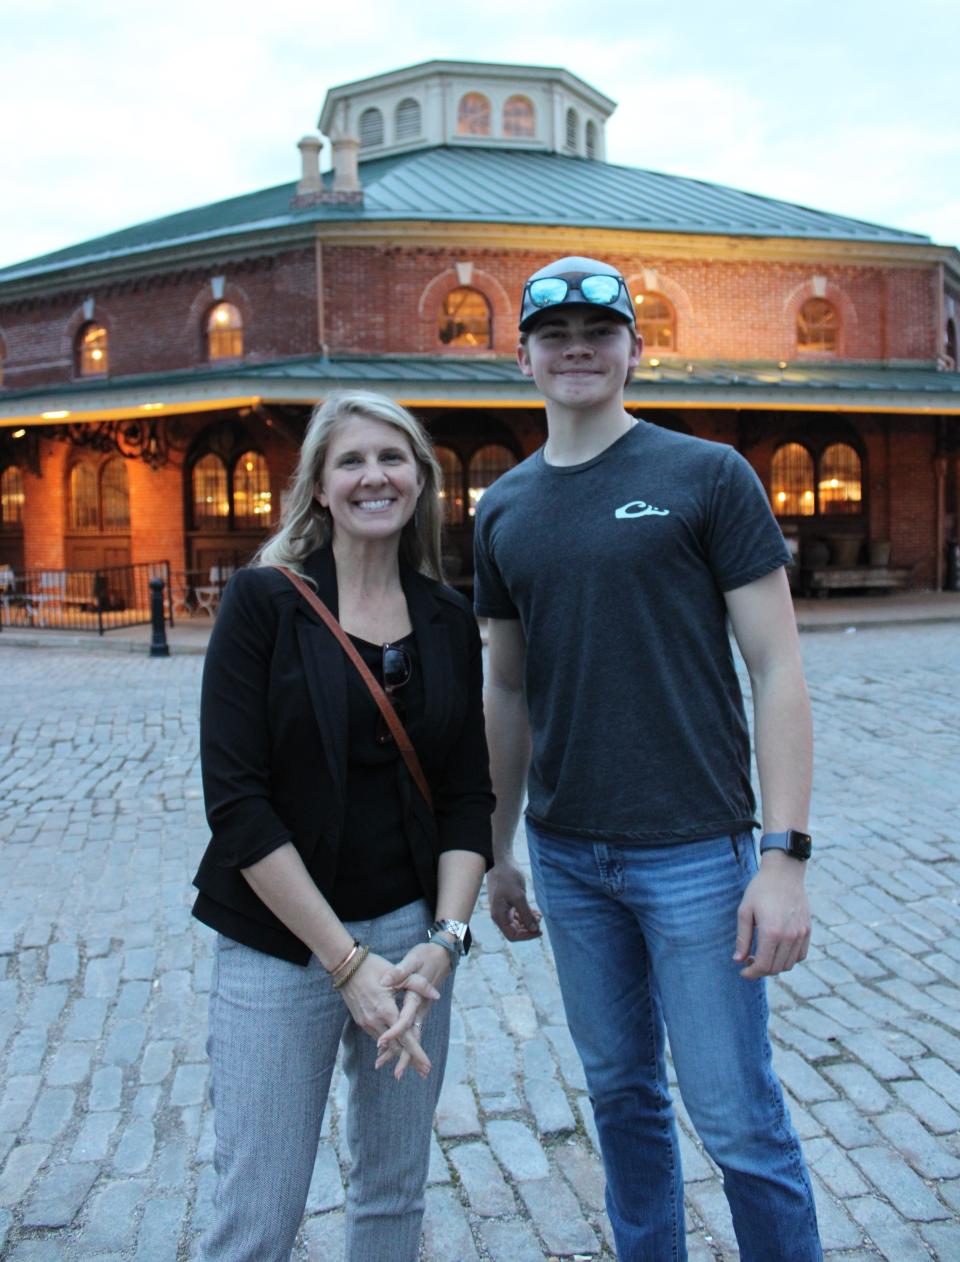 On Thursday, Feb. 9, Reid Walker of Charlotte Court House dined with her nephew Tucker Webb at Croaker's Spot soul food restaurant located in the iconic octagonal-shaped Farmers Market building in Old Towne Petersburg. Webb, a freshman, pitches for the Richard Bland College of William and Mary baseball team.